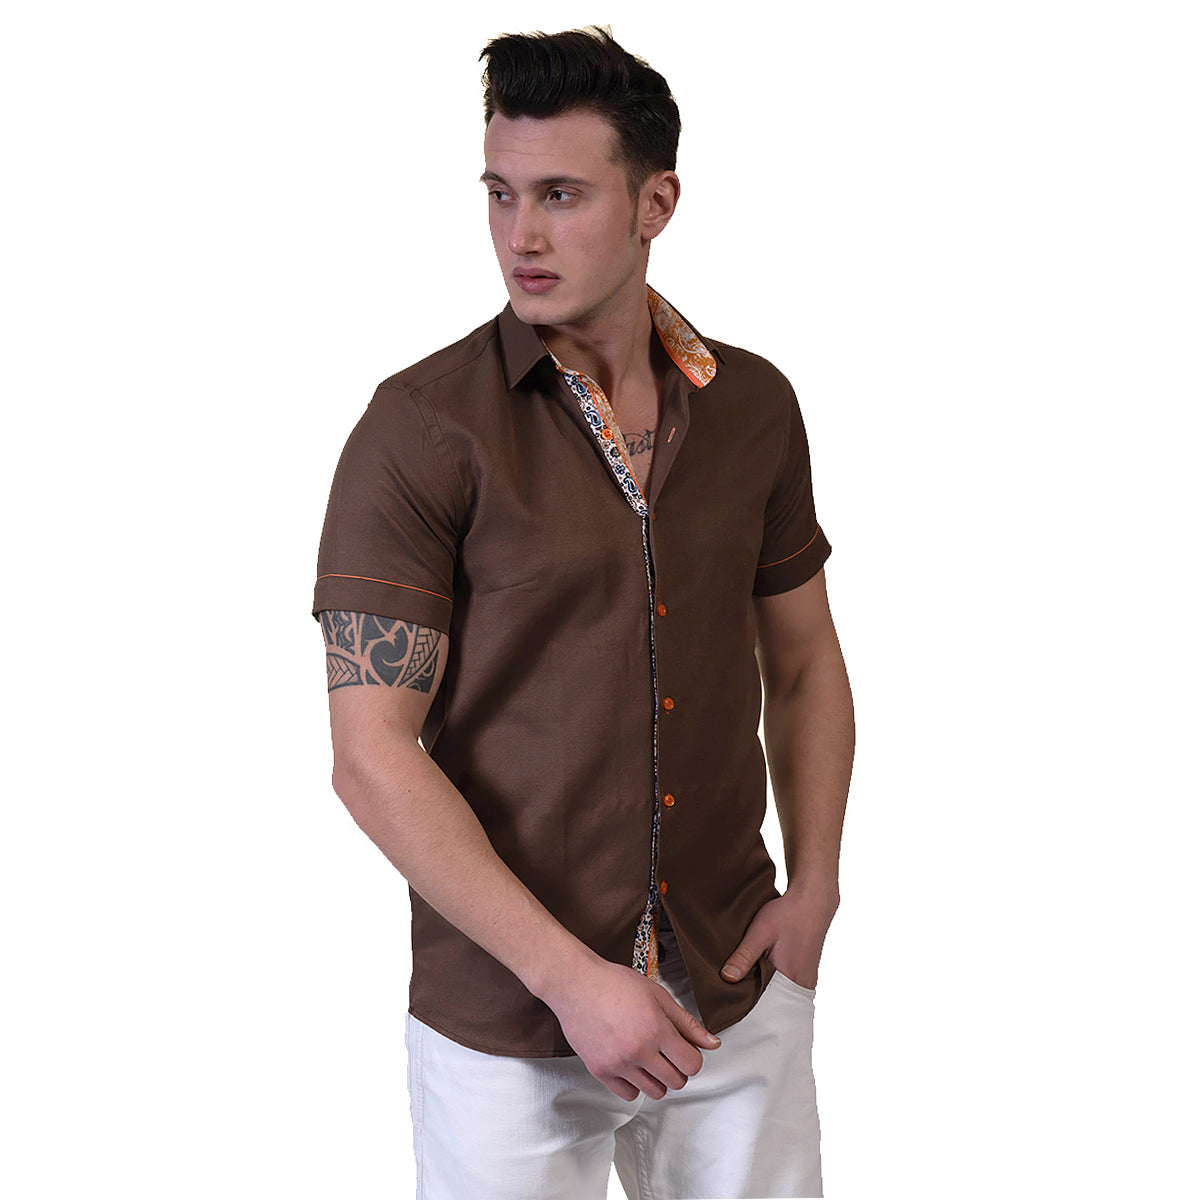 Mens Brown Short Sleeve Button up Shirts - Tailored Slim Fit Cotton Dress Shirts